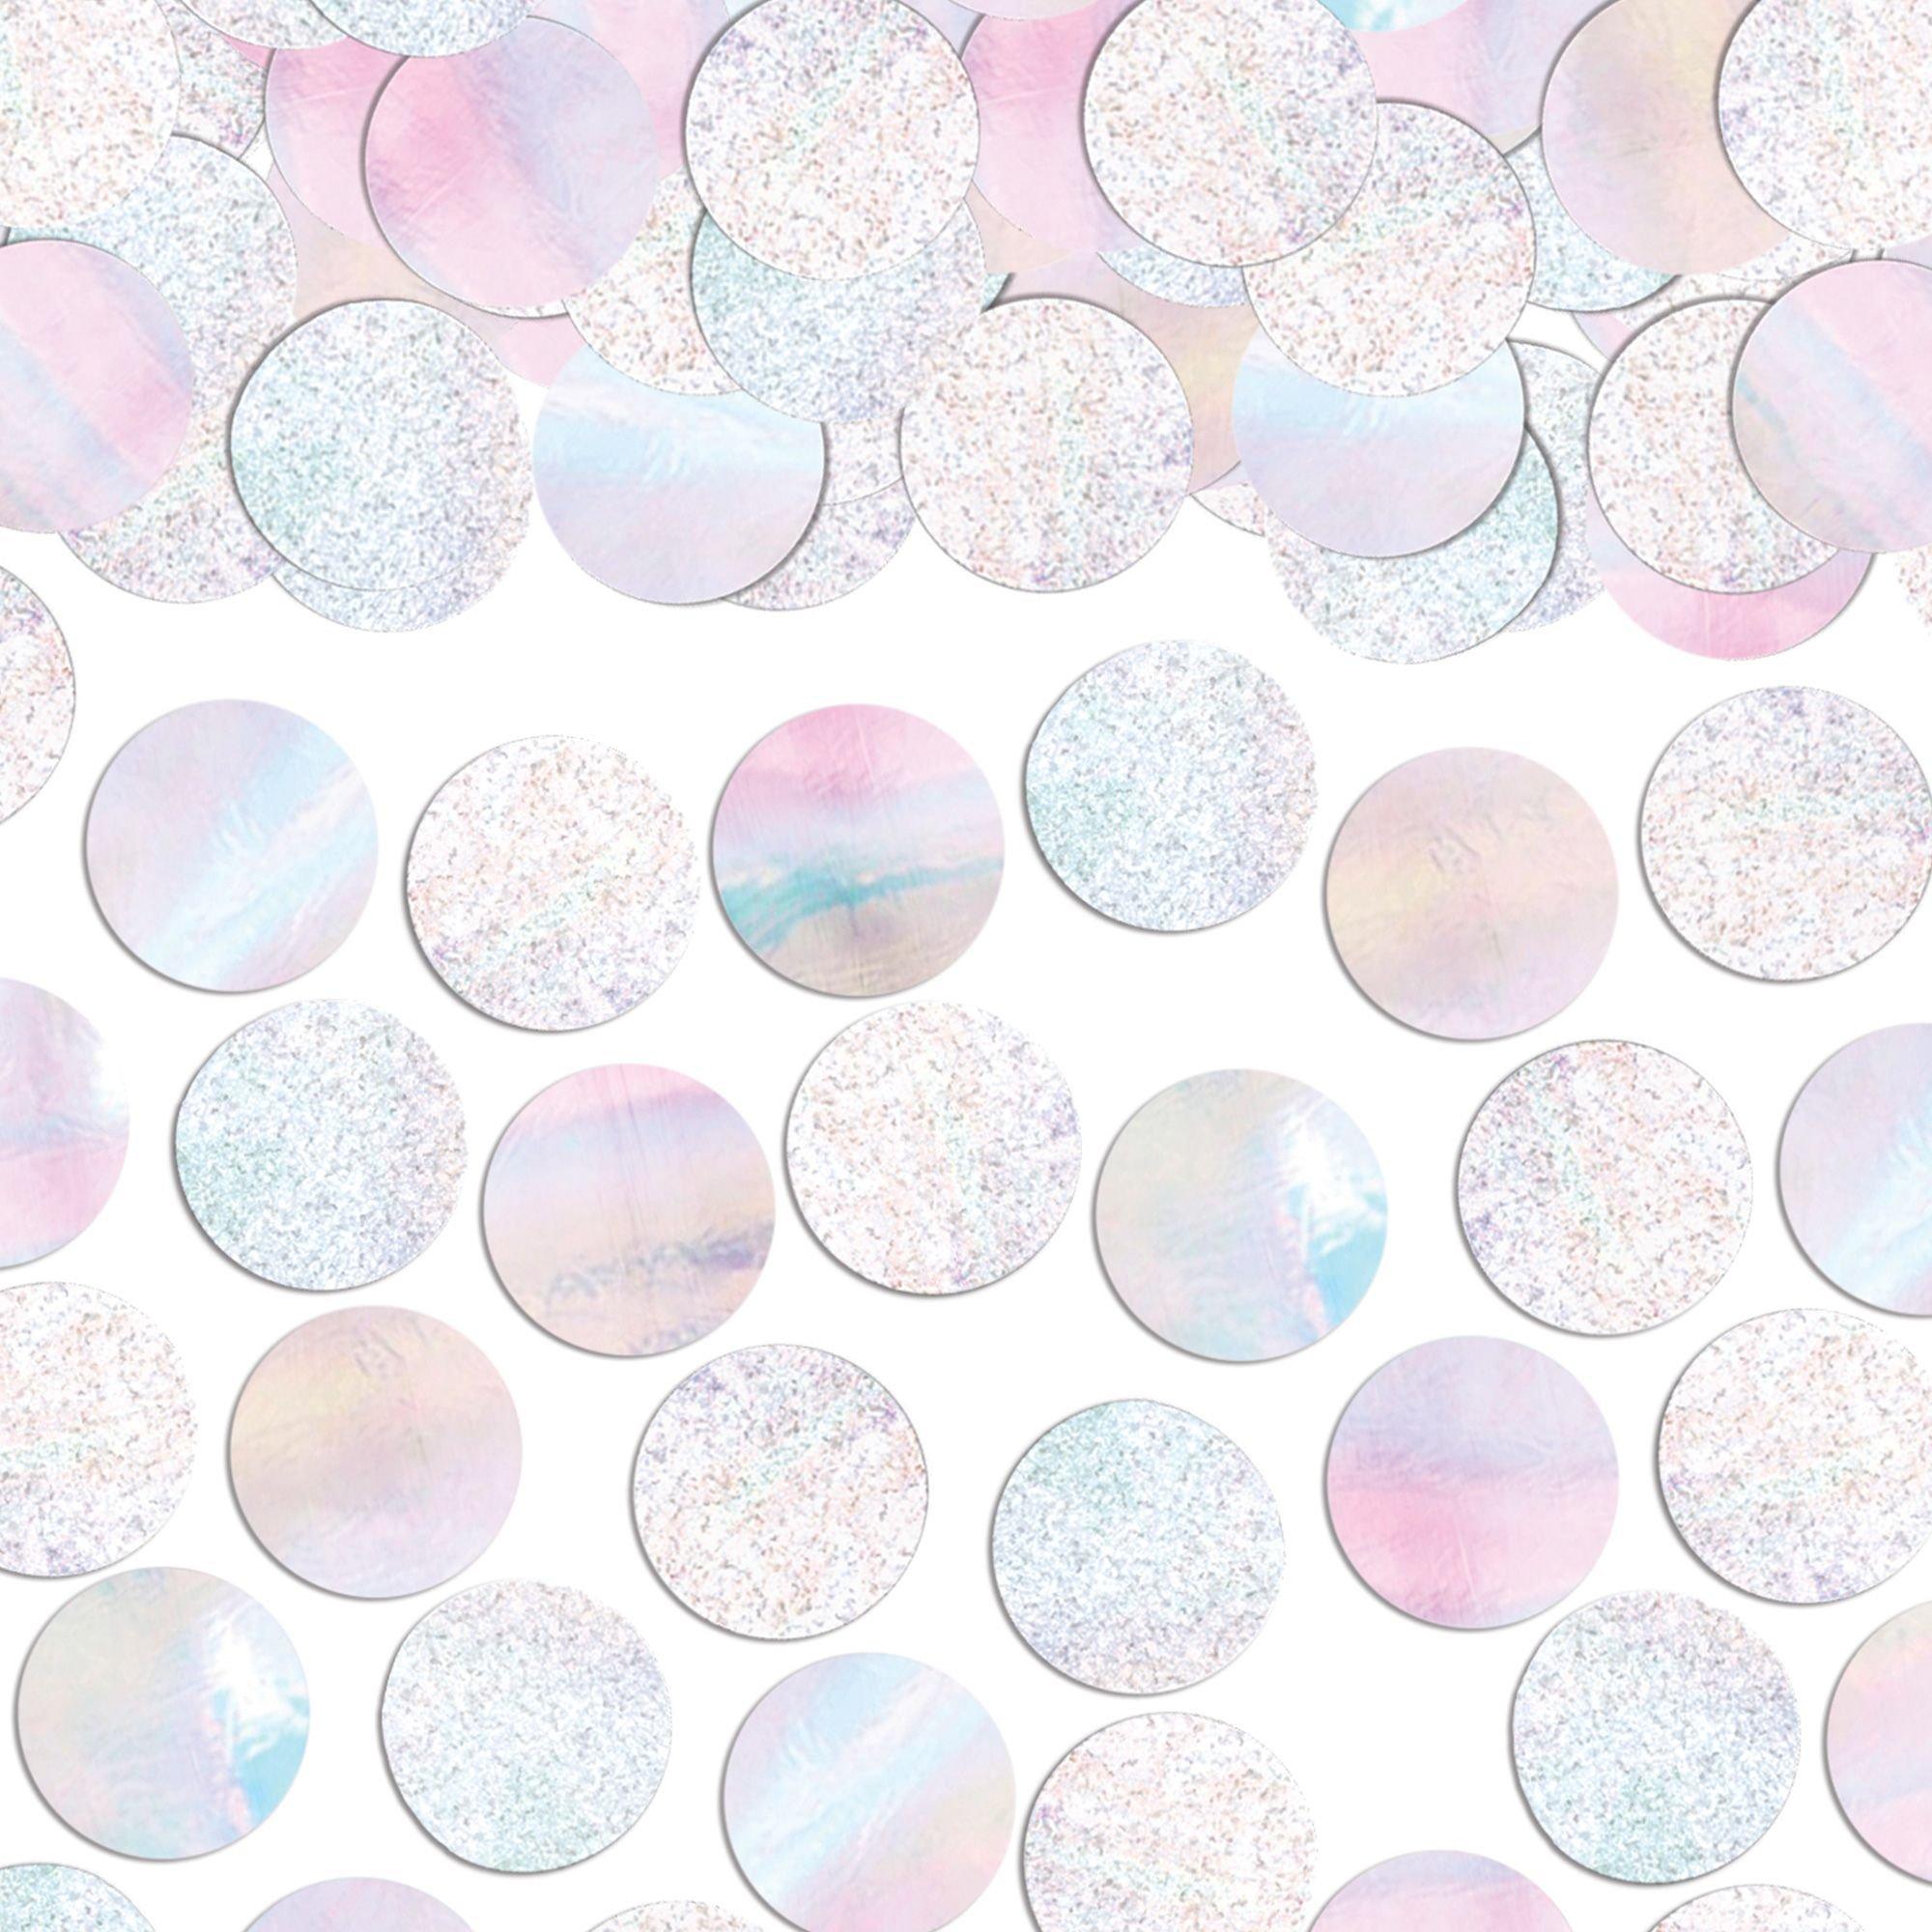 Shimmering Iridescent Glitter & Foil Circle Confetti - 2.25 oz. (Pack of 1)  - Perfect for Weddings, Birthdays, & Special Events